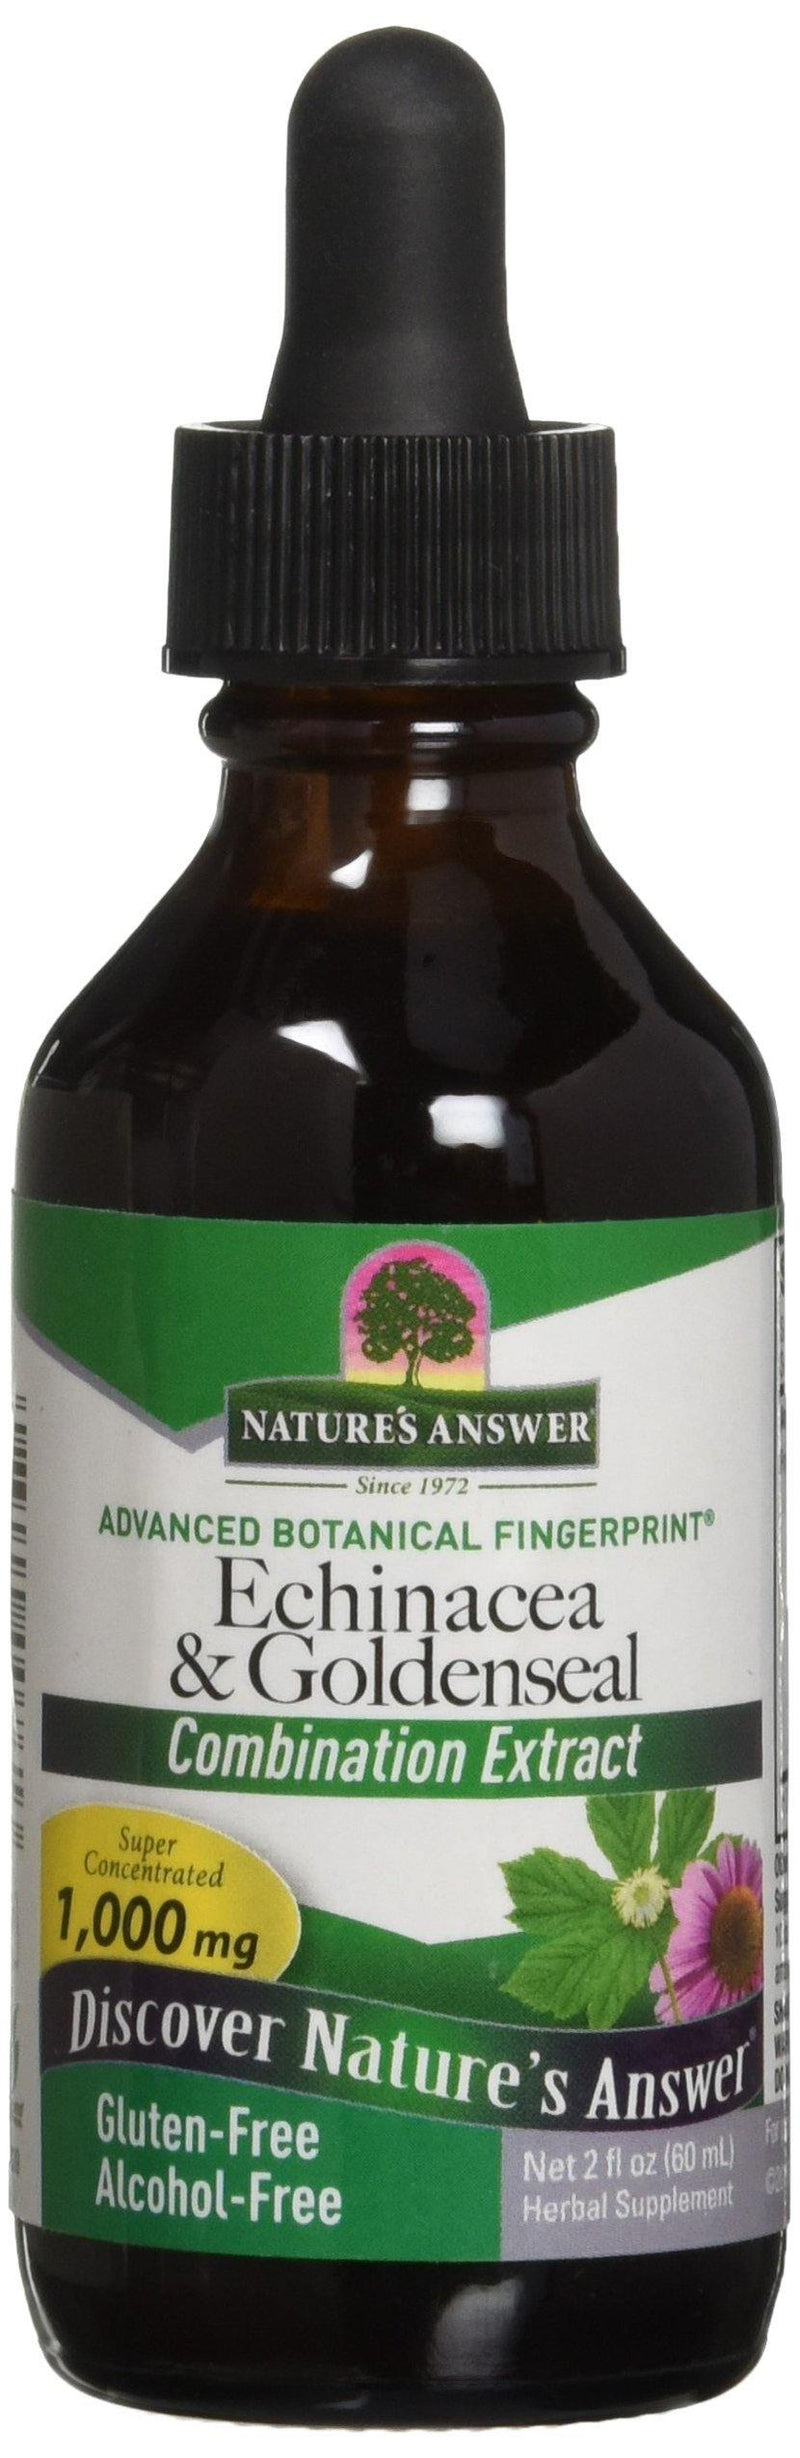 Nature's Answer Alcohol-Free Echinacea and Goldenseal, 2-Fluid Ounces - Vitamins Emporium